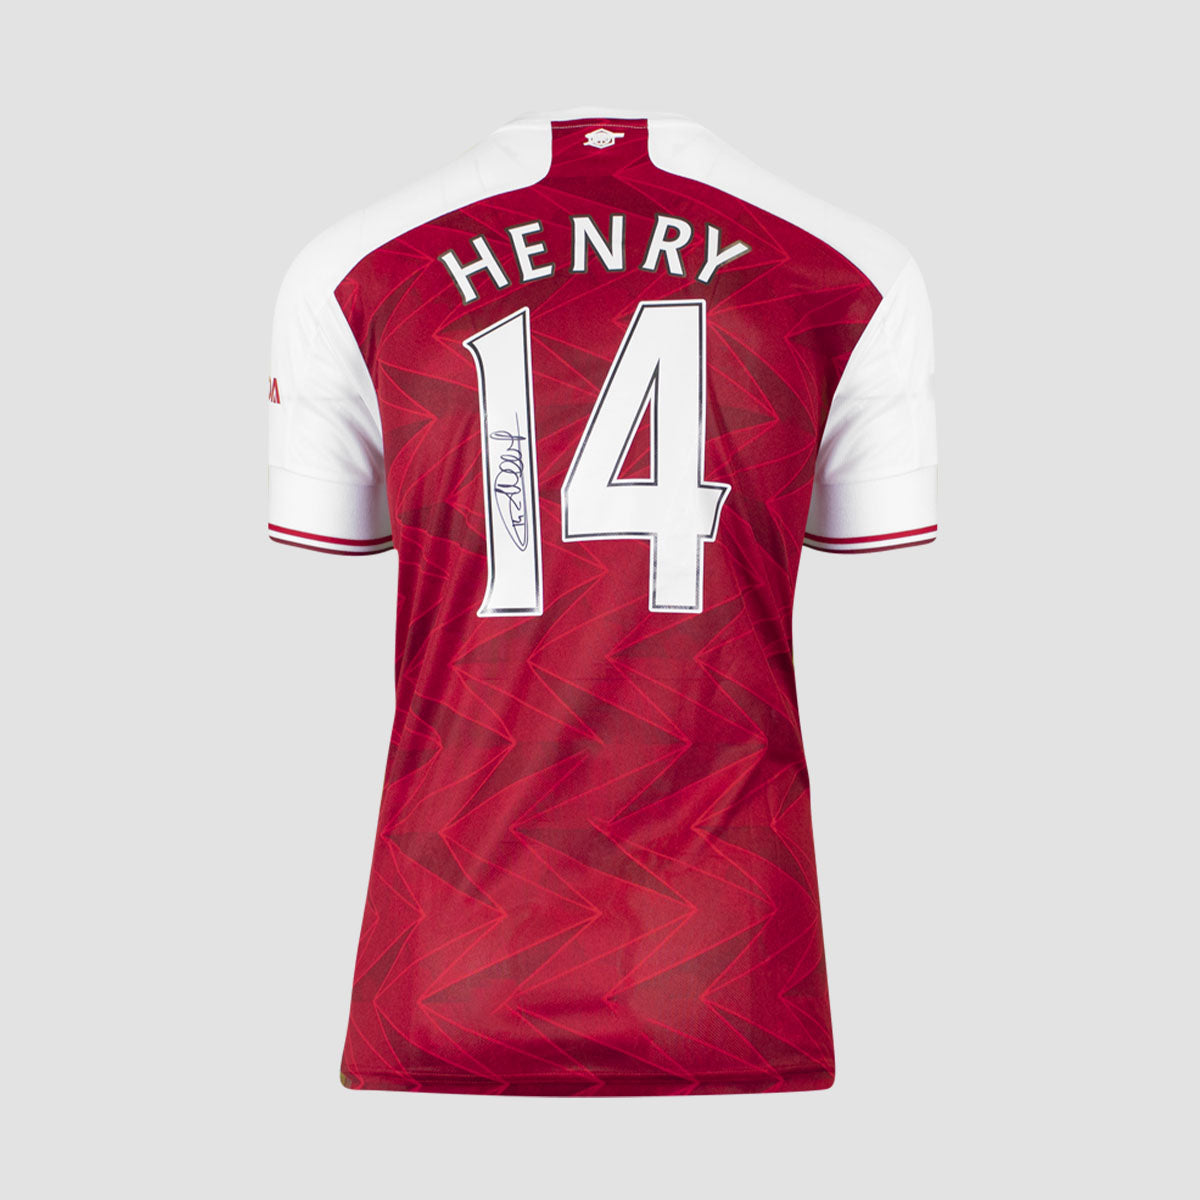 Thierry Henry Back Signed Arsenal 2020-21 Home Shirt (Boxed)